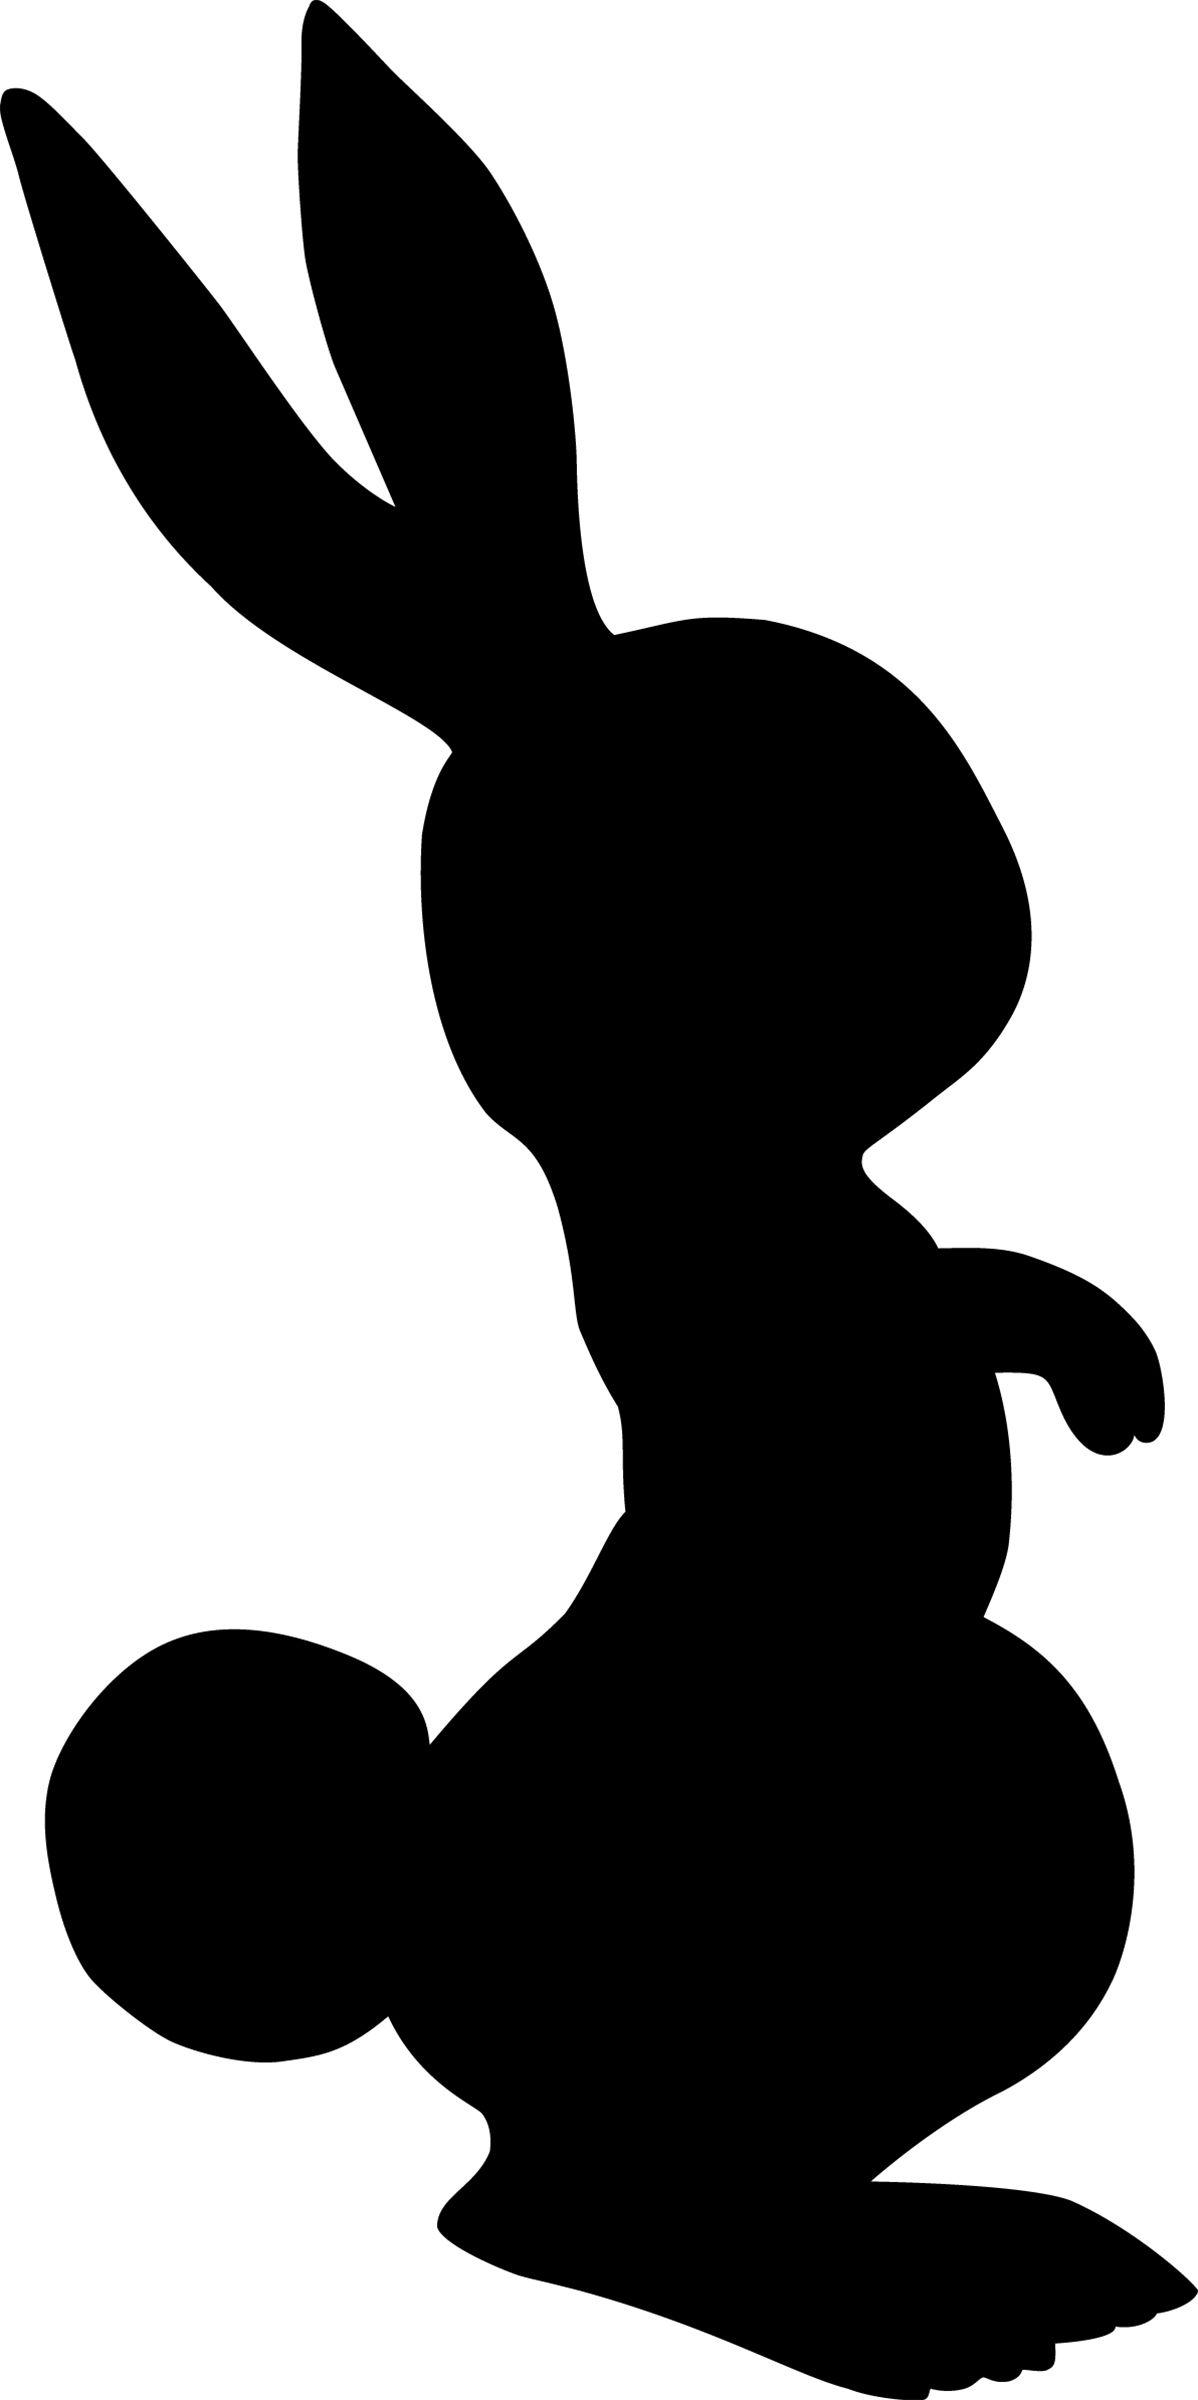 Bunny Silhouette Logo - Easter Bunny Silhouette Image - The Graphics Fairy